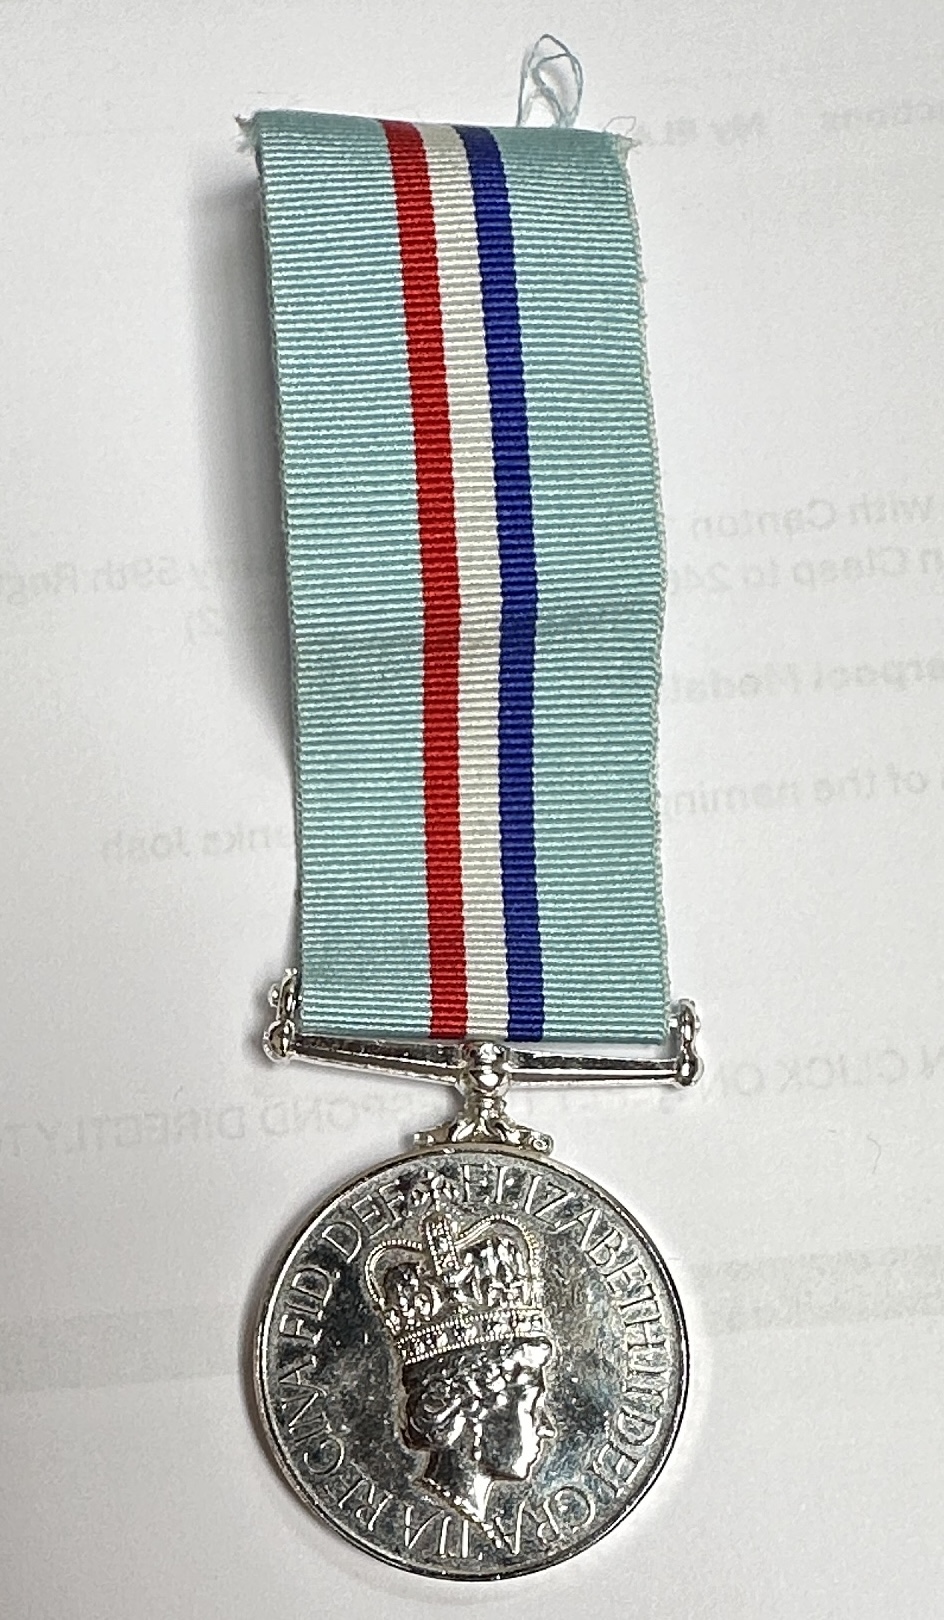 The Rhodesia Medal 1980 to '24442182 Sig S.J. Townsend. R. Signals,' together with The Zimbabwe - Bild 6 aus 8